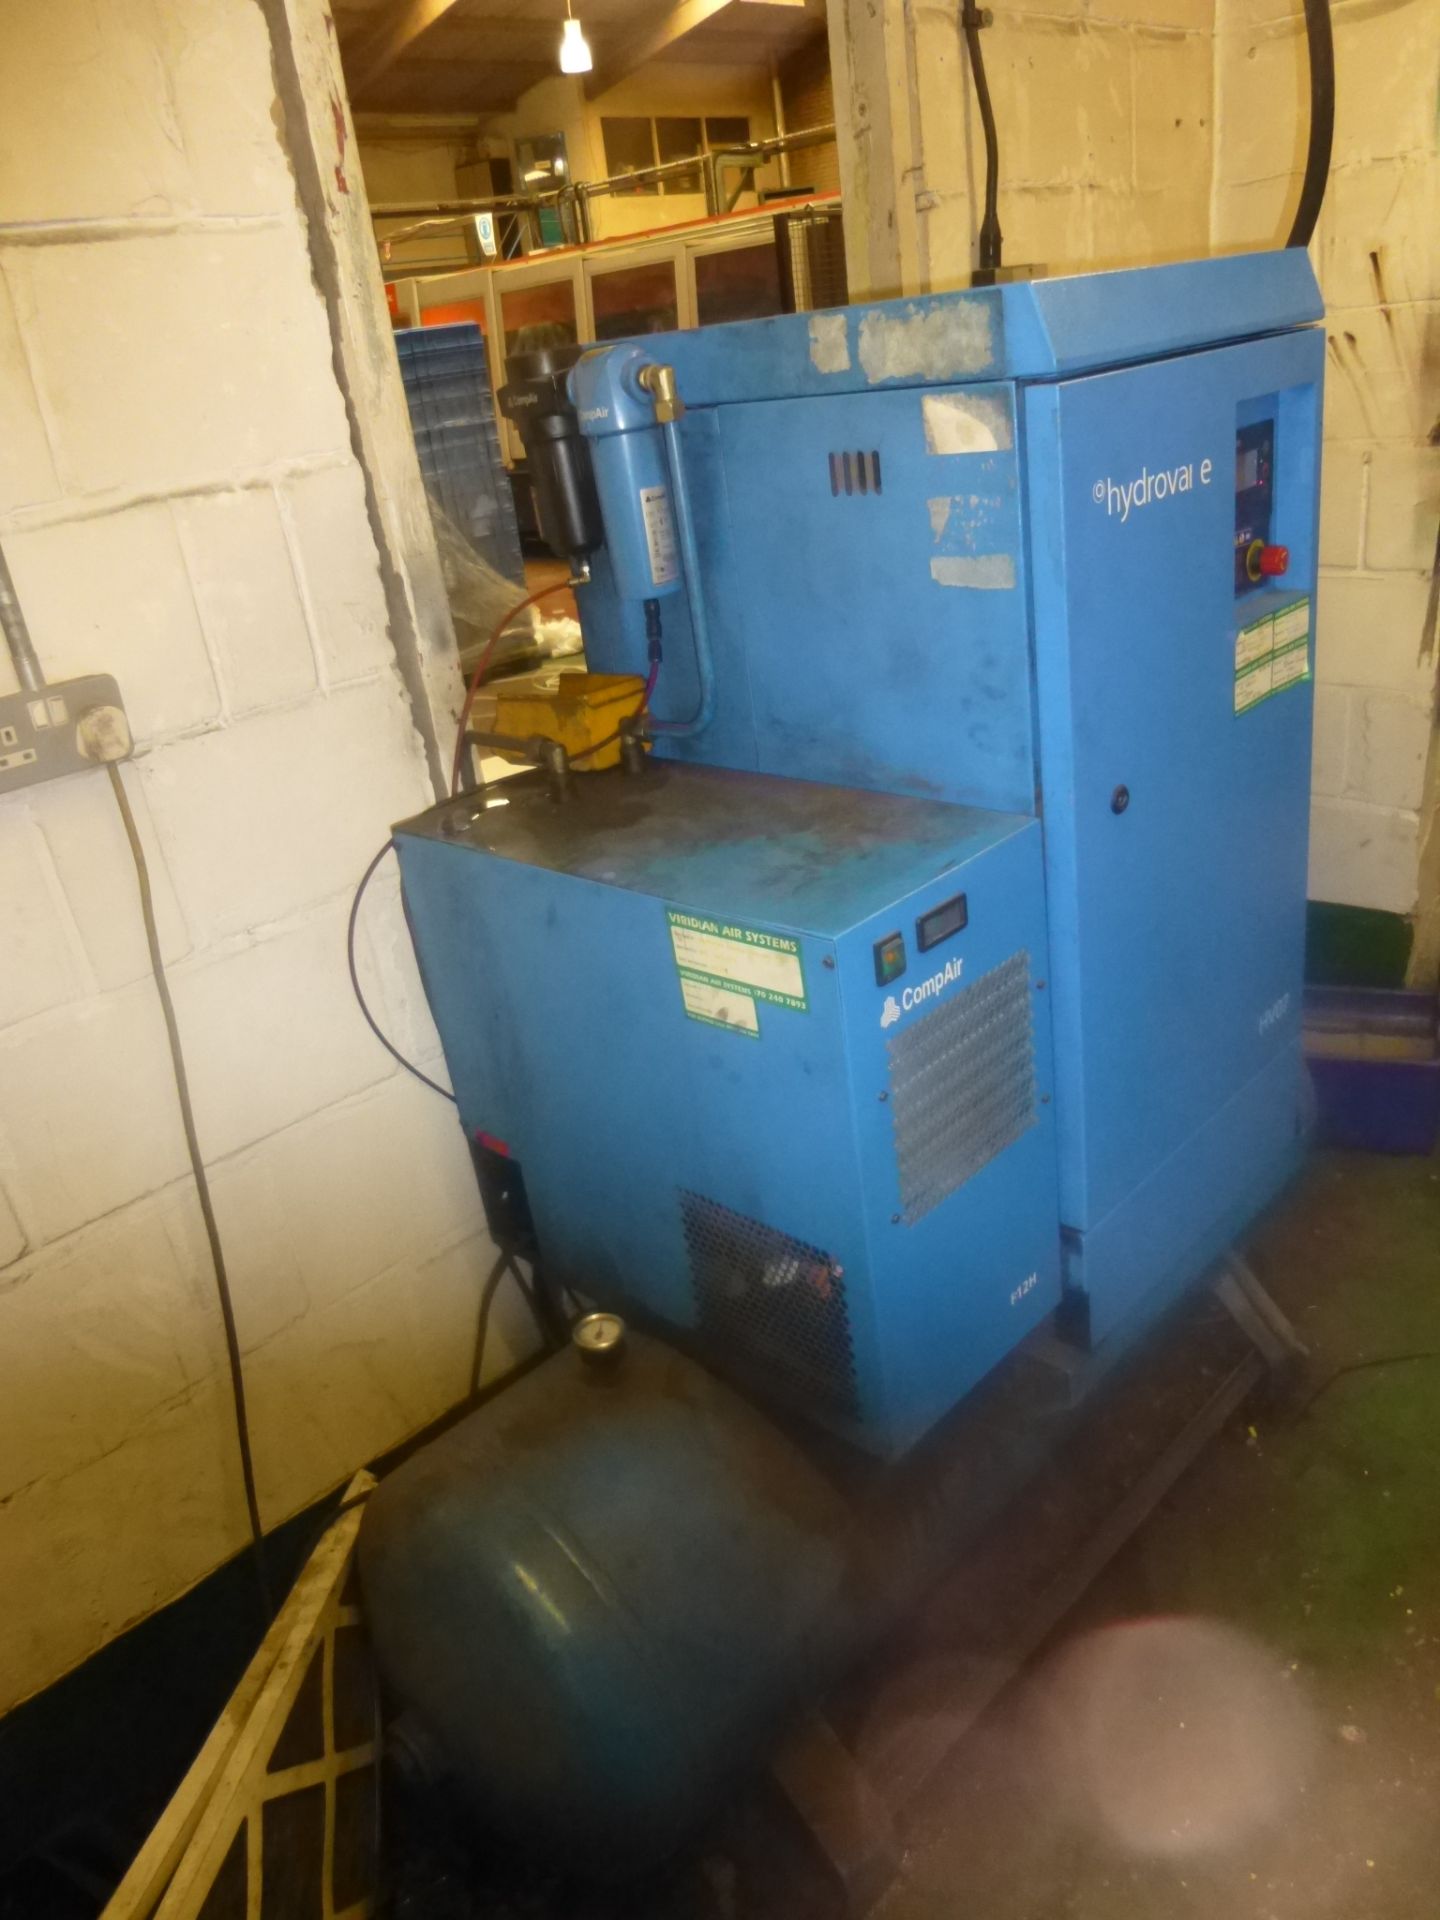 Hydrovane compare HV07 receiver mounted air compressor - Image 2 of 3